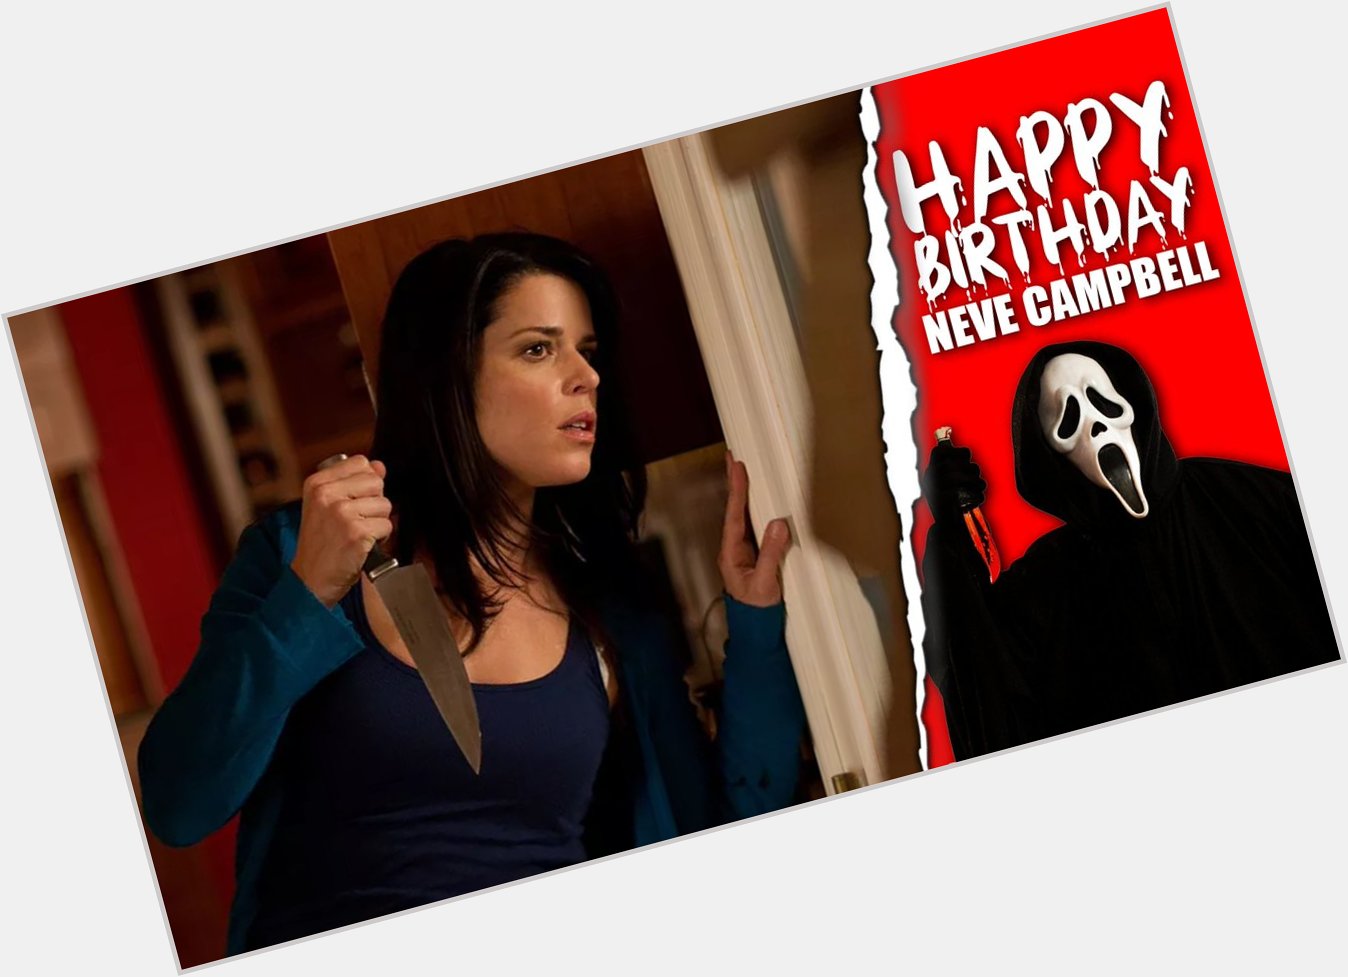 A very Happy Birthday to Neve Campbell, who turned 46 years old today! 